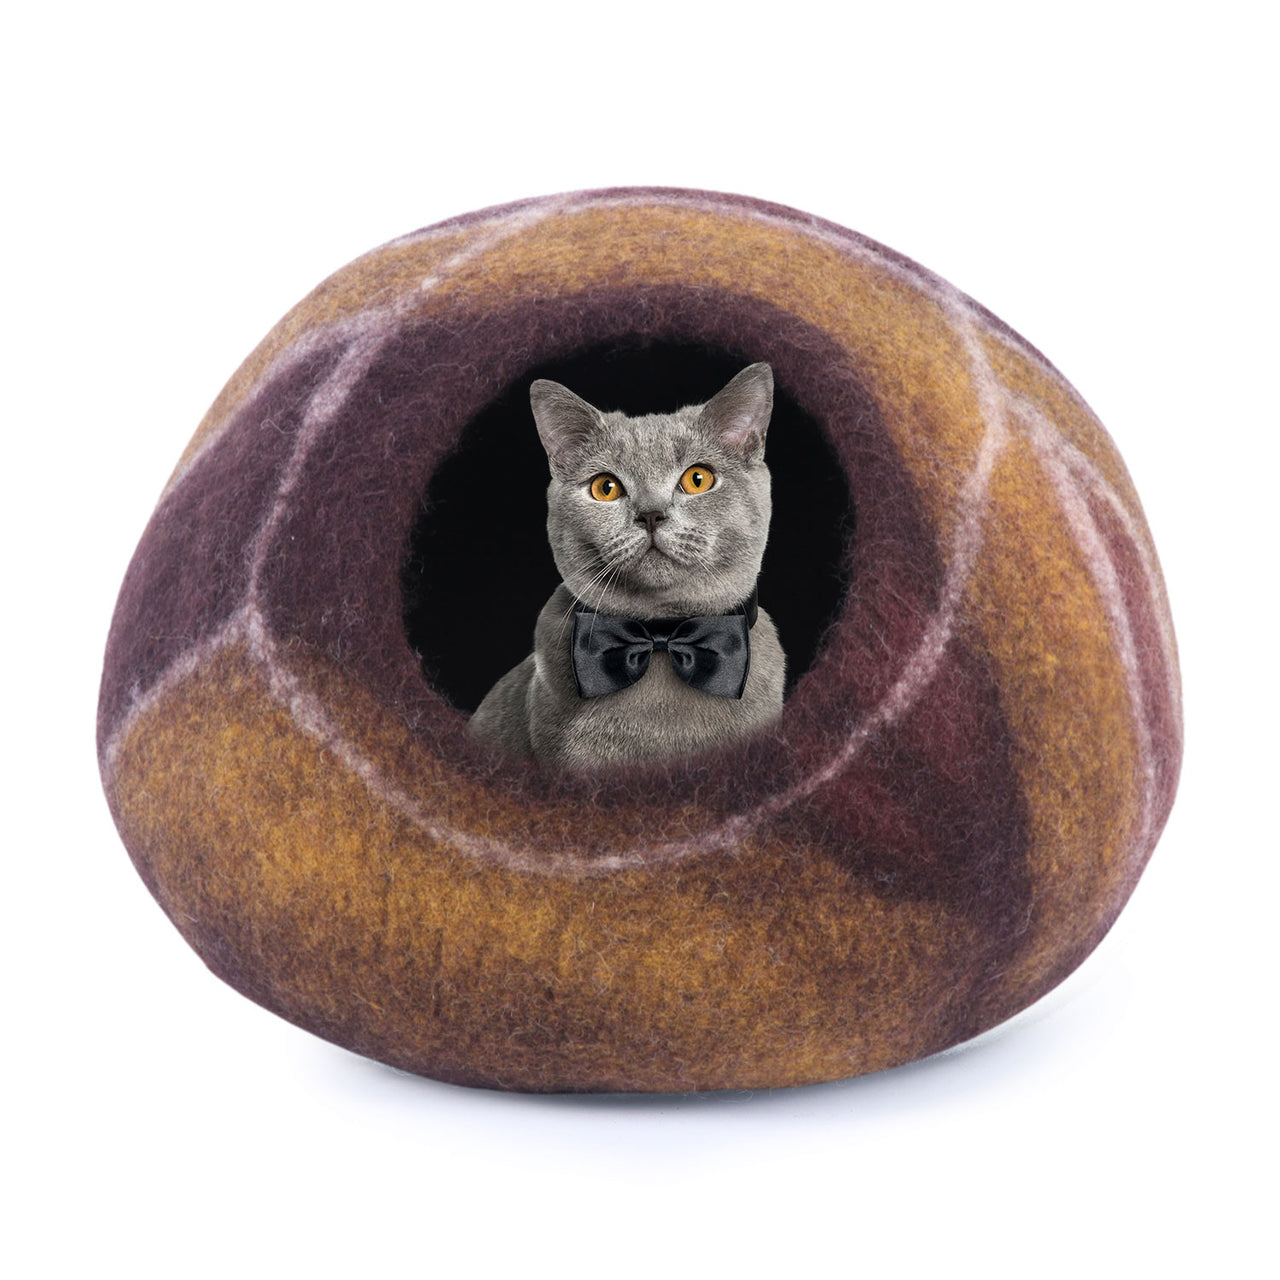 Felt and Wool Cat Cave Bed - Ecofriendly Felt Cat Cave for Cats and Kittens